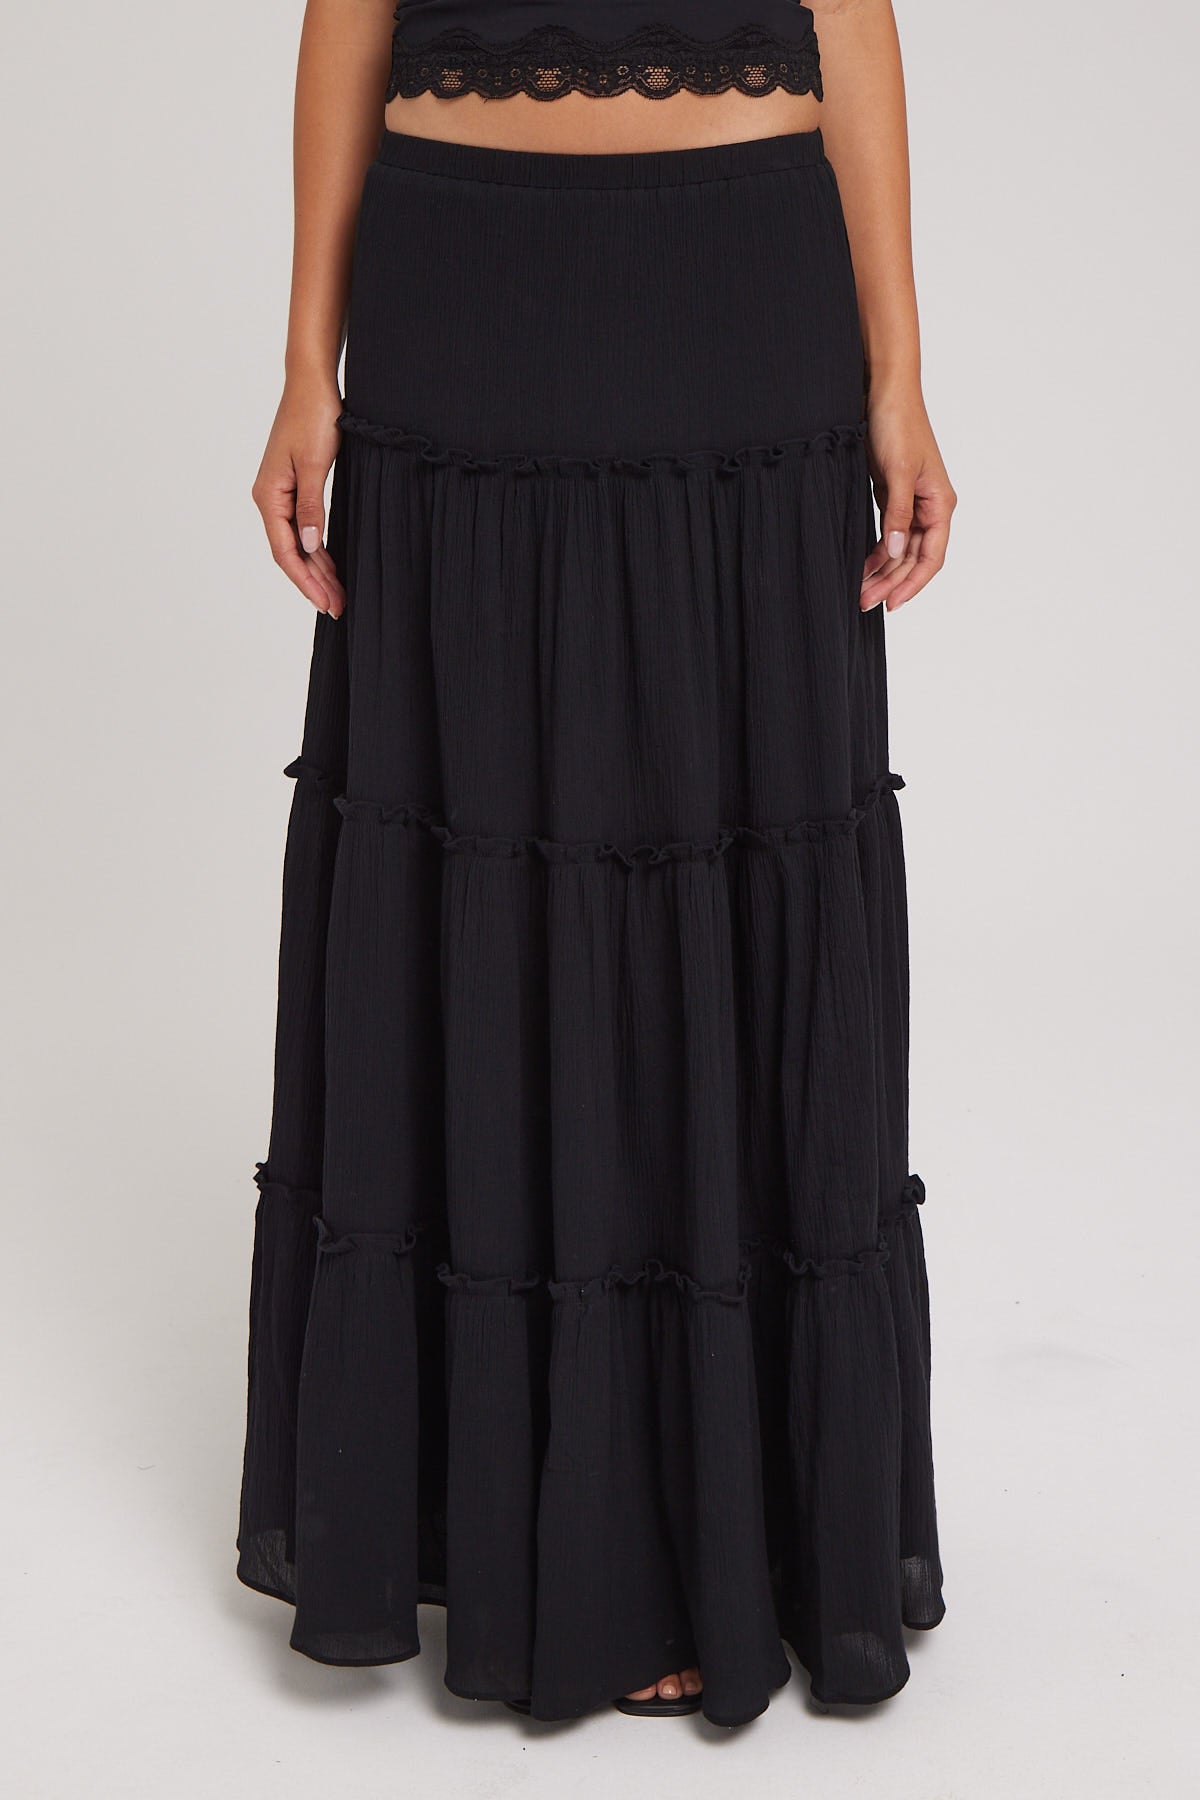 Luck & Trouble Summer Tiered Maxi Skirt Black – Universal Store